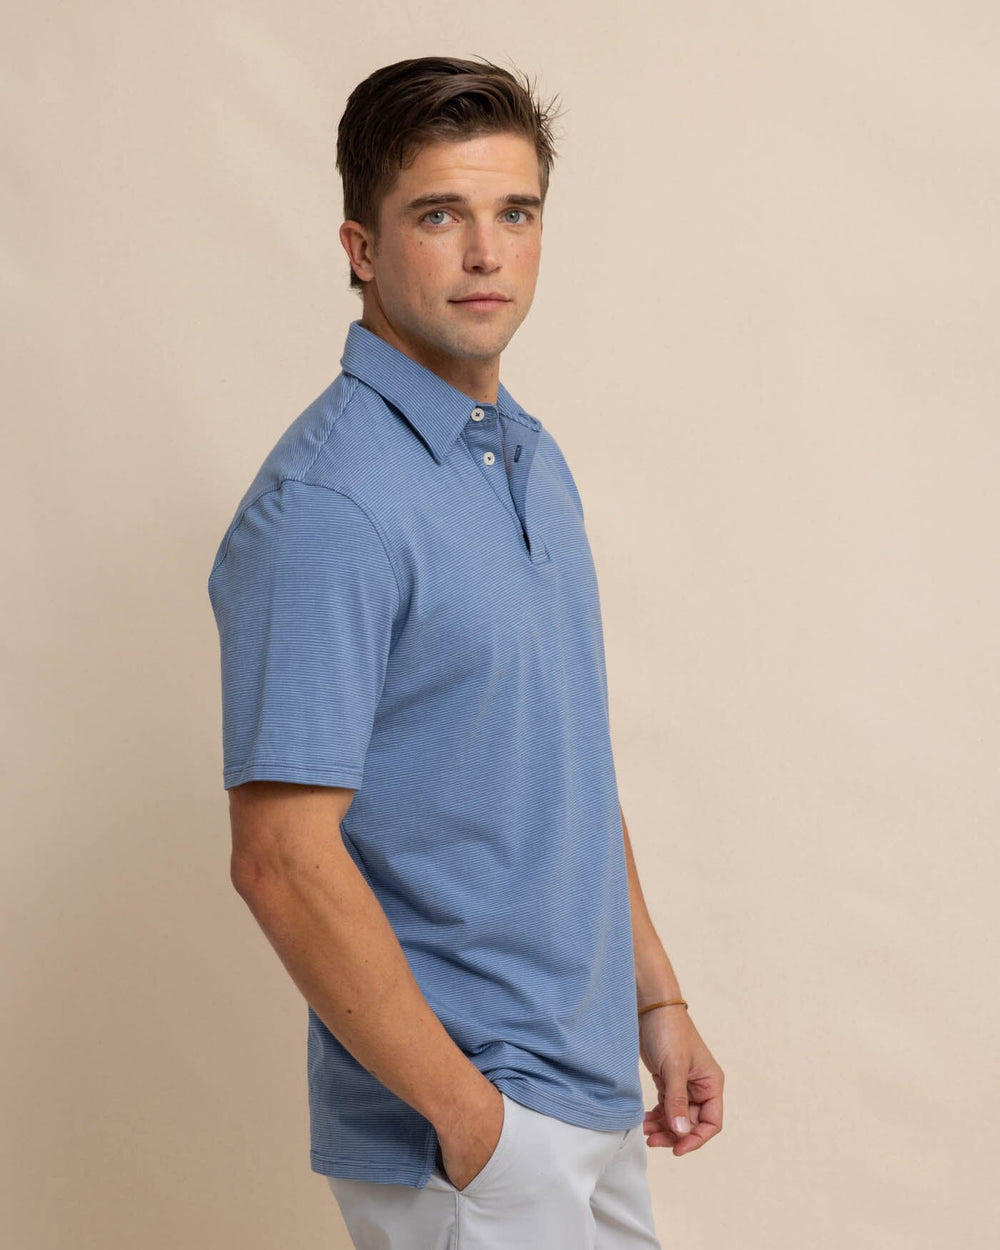 The front view of the Southern Tide The Seaport Davenport Stripe Polo by Southern Tide - Coronet Blue